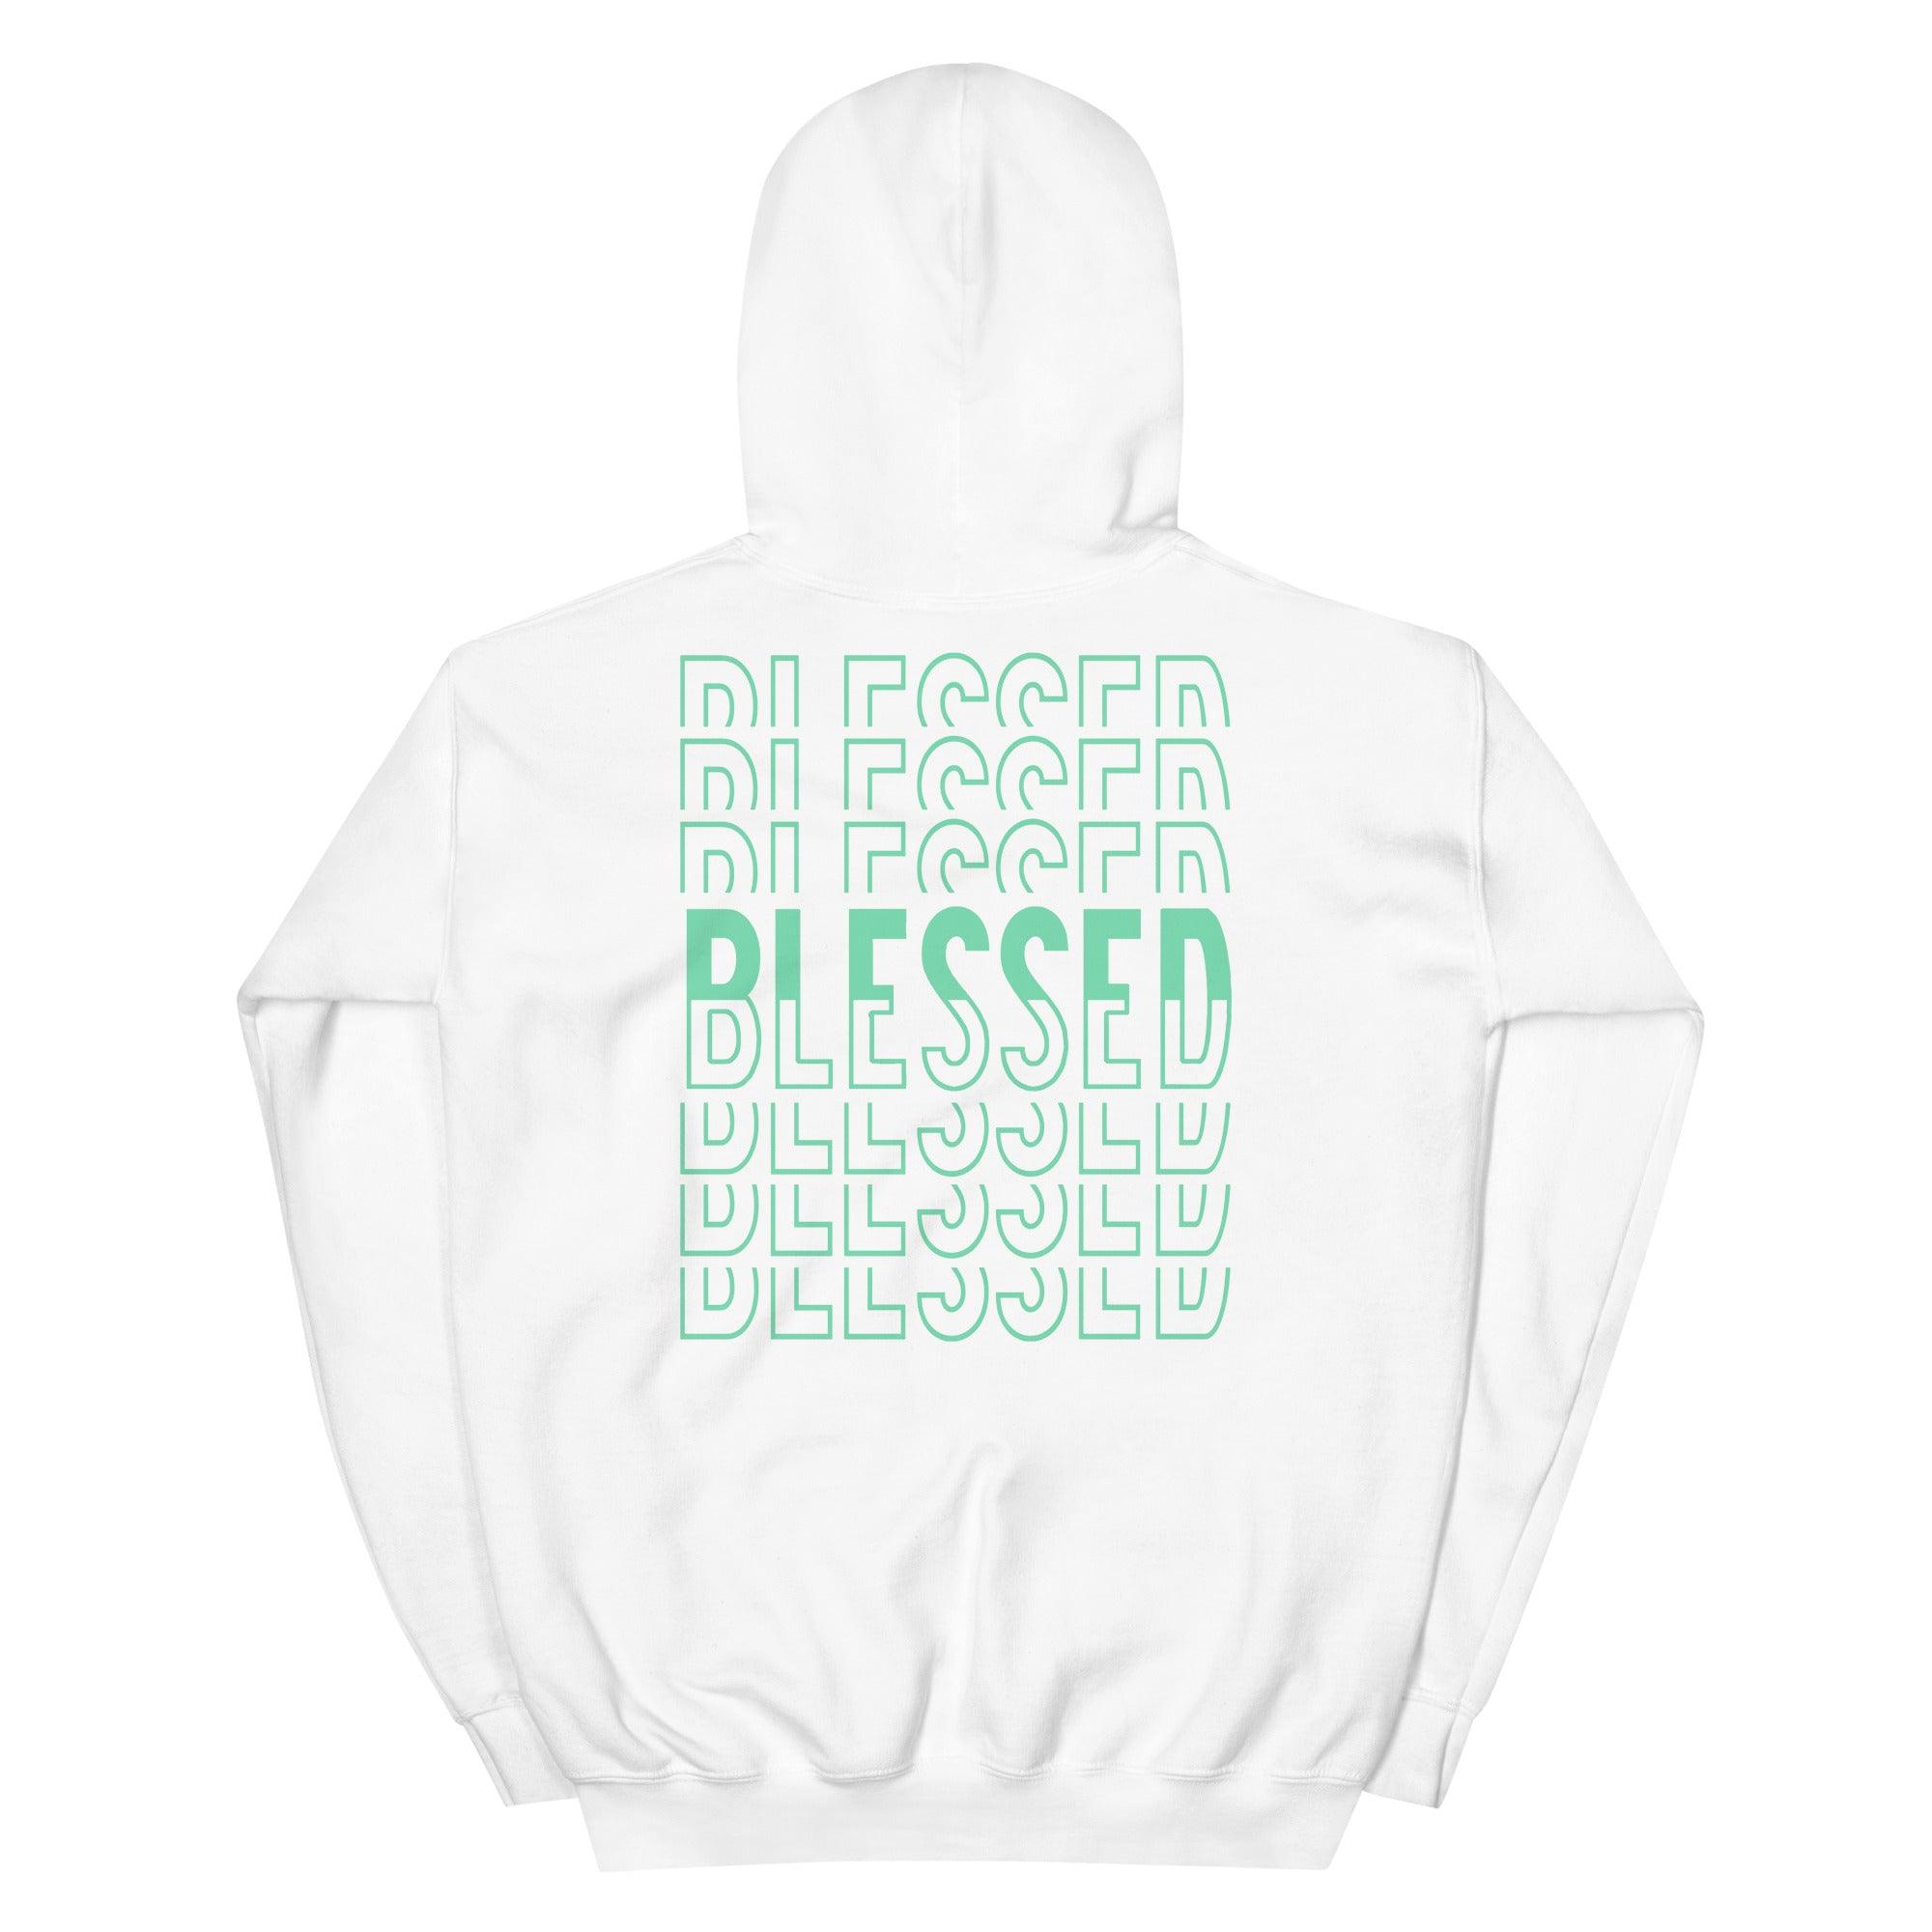 White Blessed Hoodie Nike Dunks Low Green Glow photo